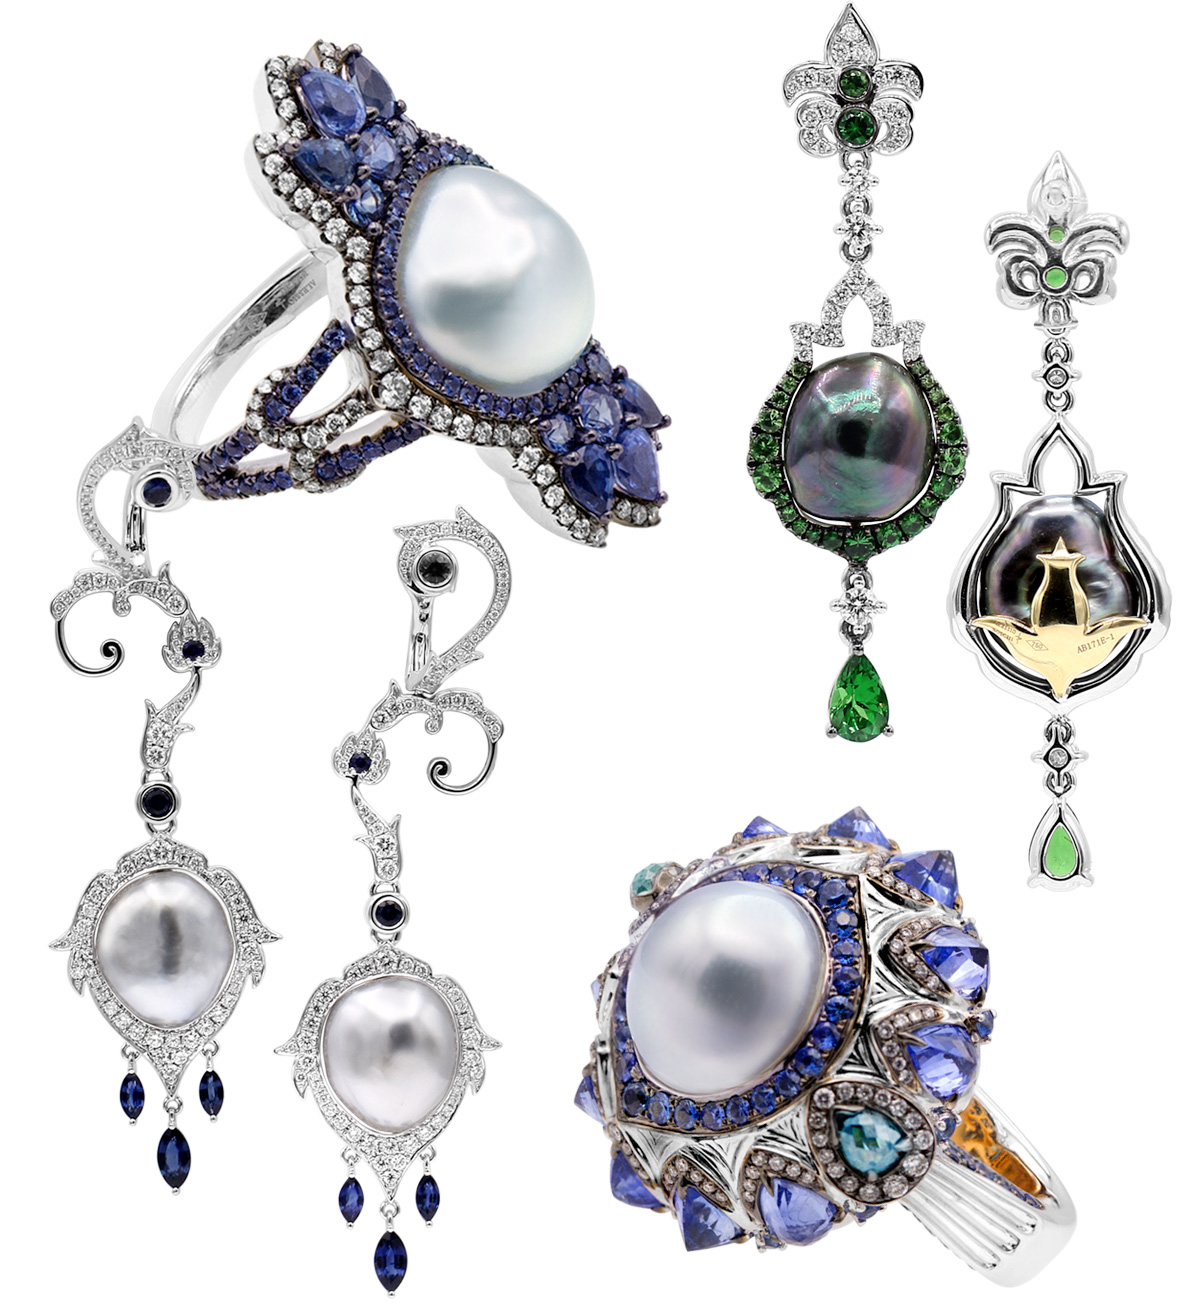 Alessio Boschi Mughal Perfumes collection rings and earrings